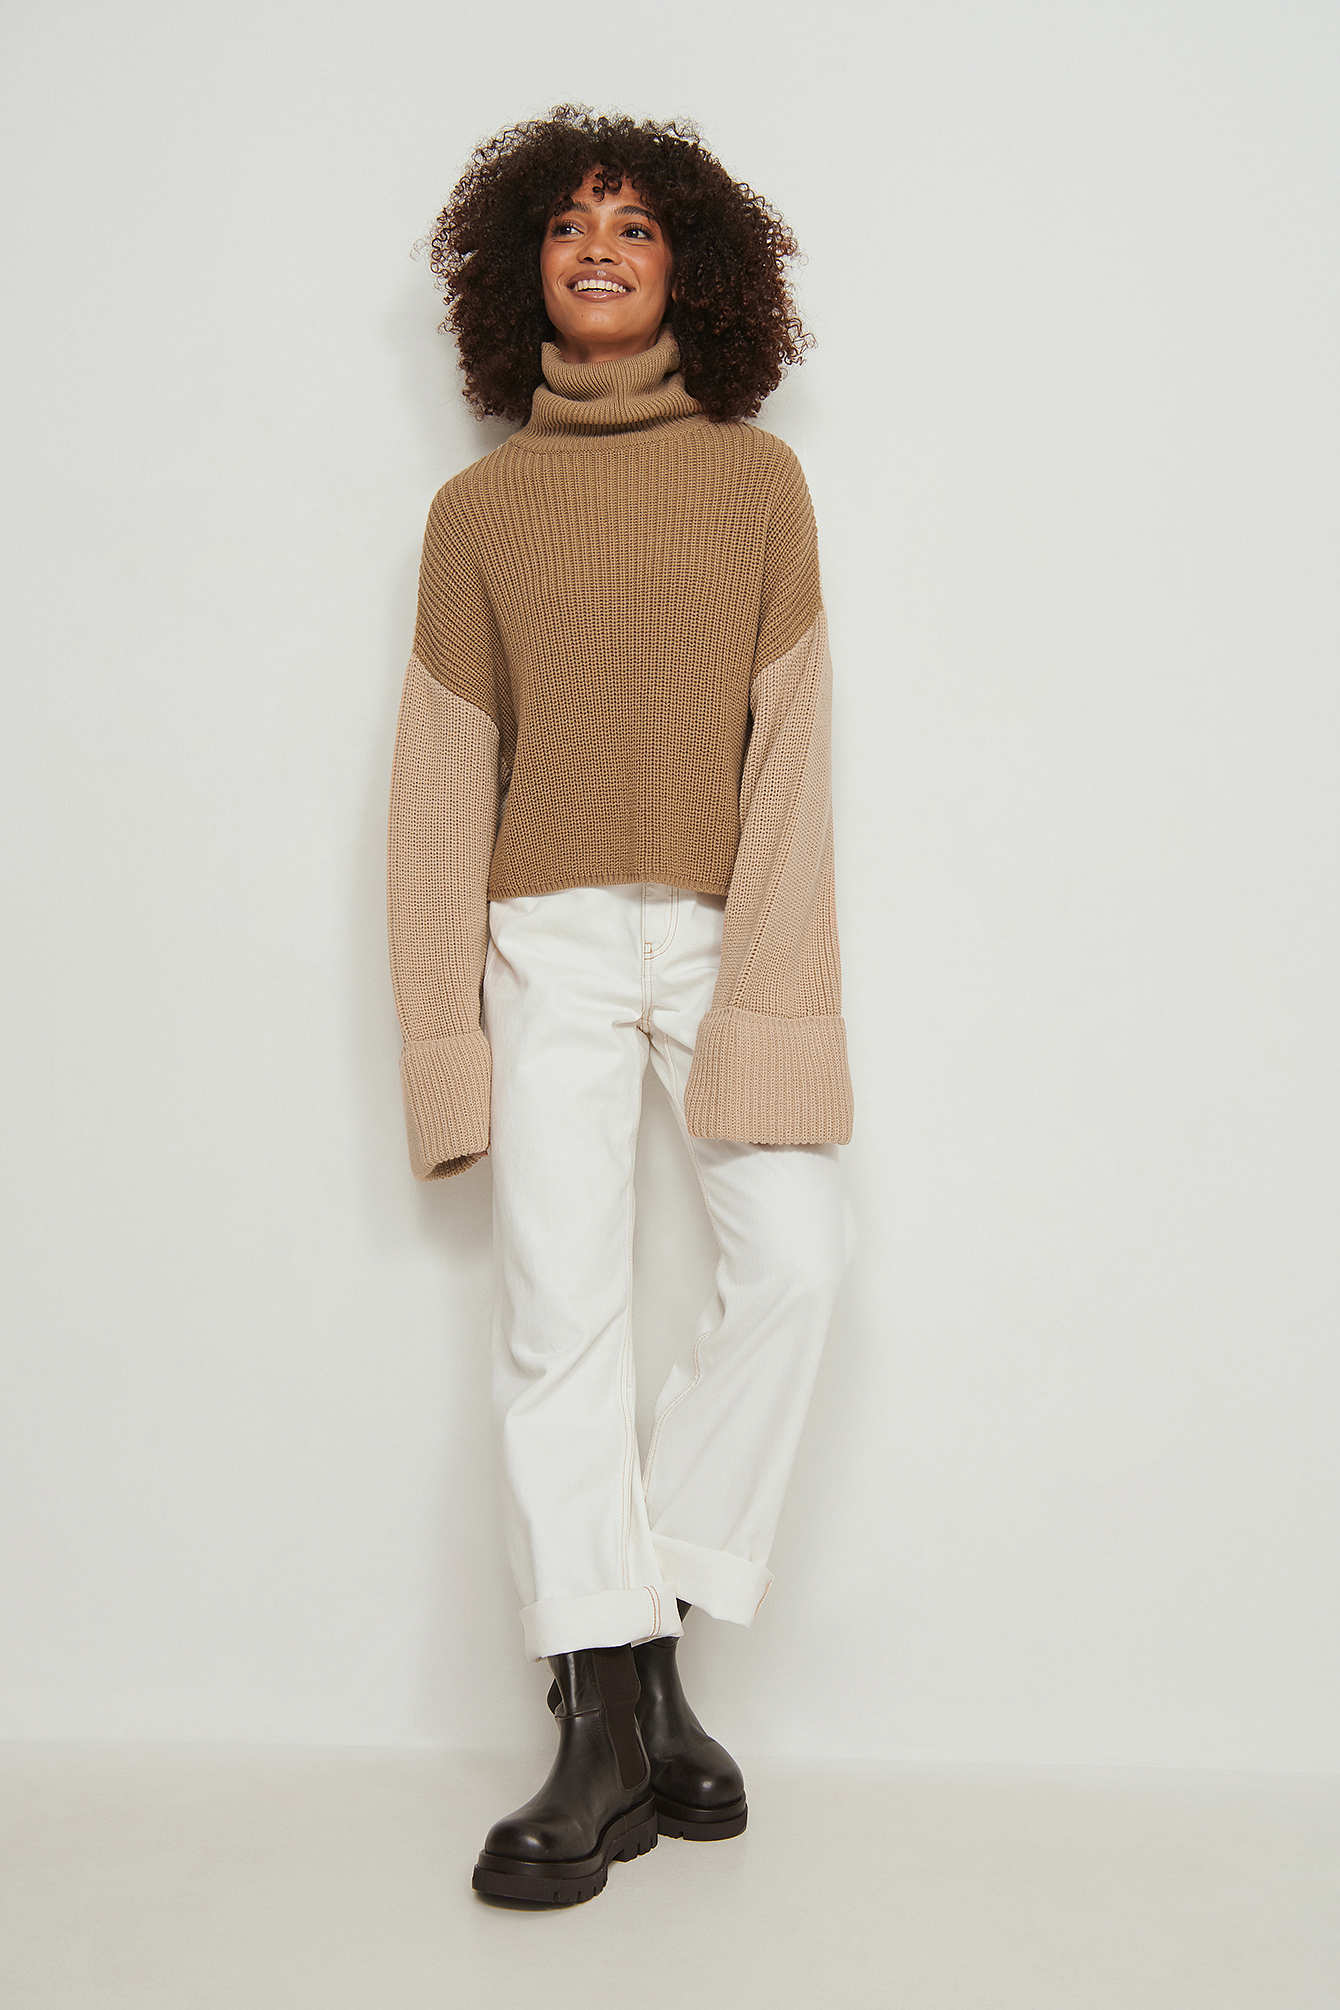 High Neck Colour Block Knitted Sweater Outfit